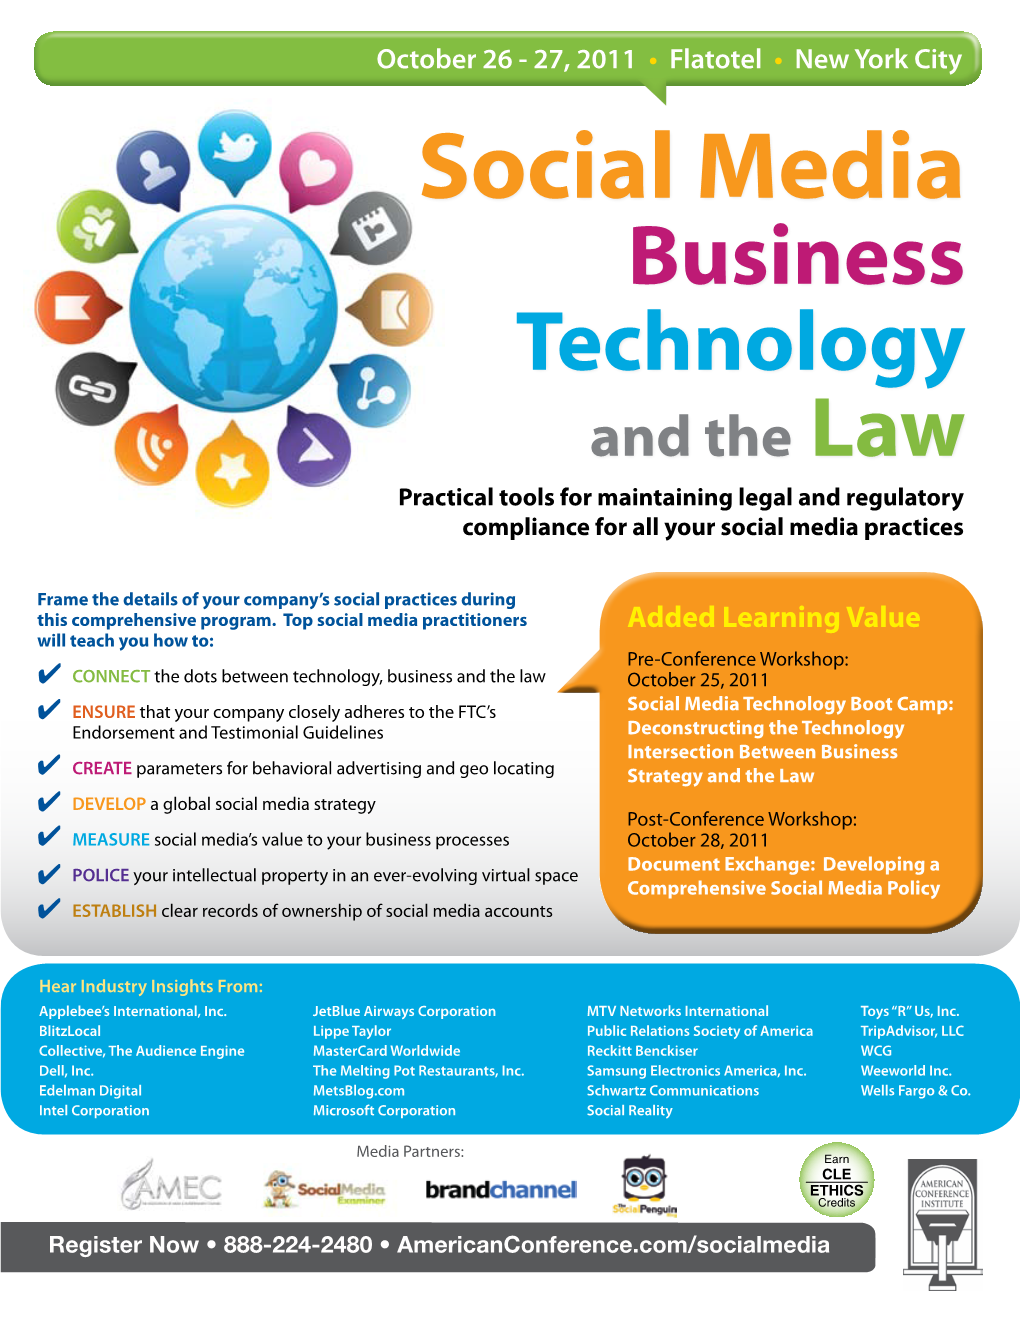 Social Media Business Technology and the Law Practical Tools for Maintaining Legal and Regulatory Compliance for All Your Social Media Practices